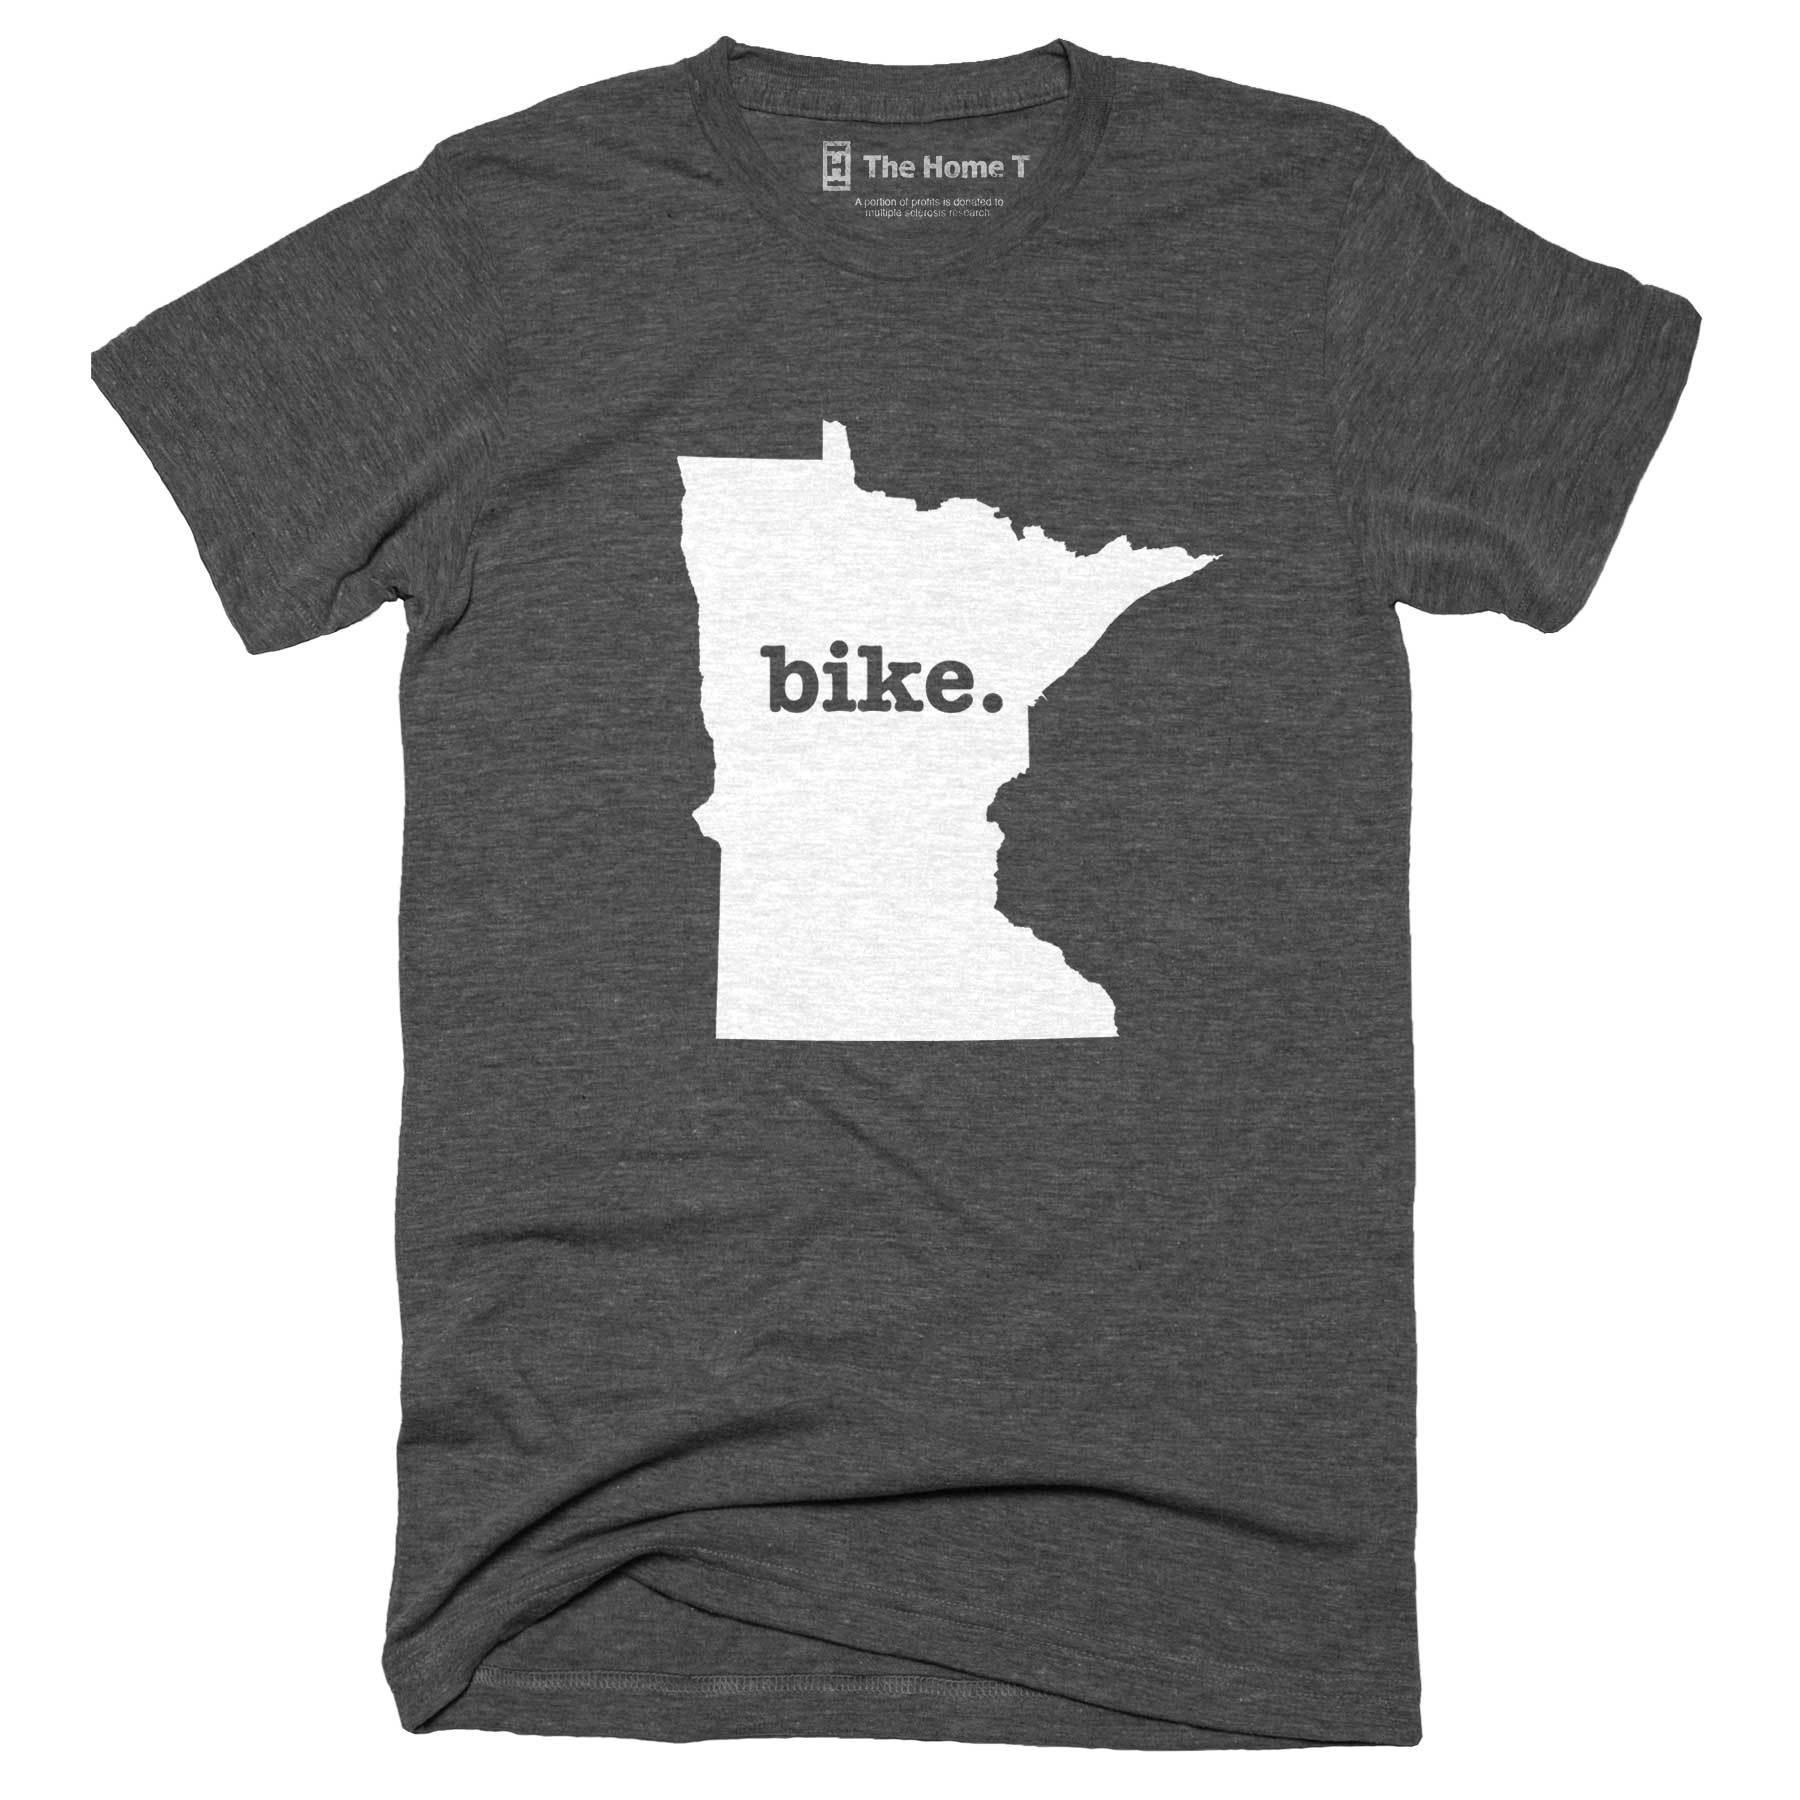 Minnesota Bike Home T-Shirt Outdoor Collection The Home T XS Grey